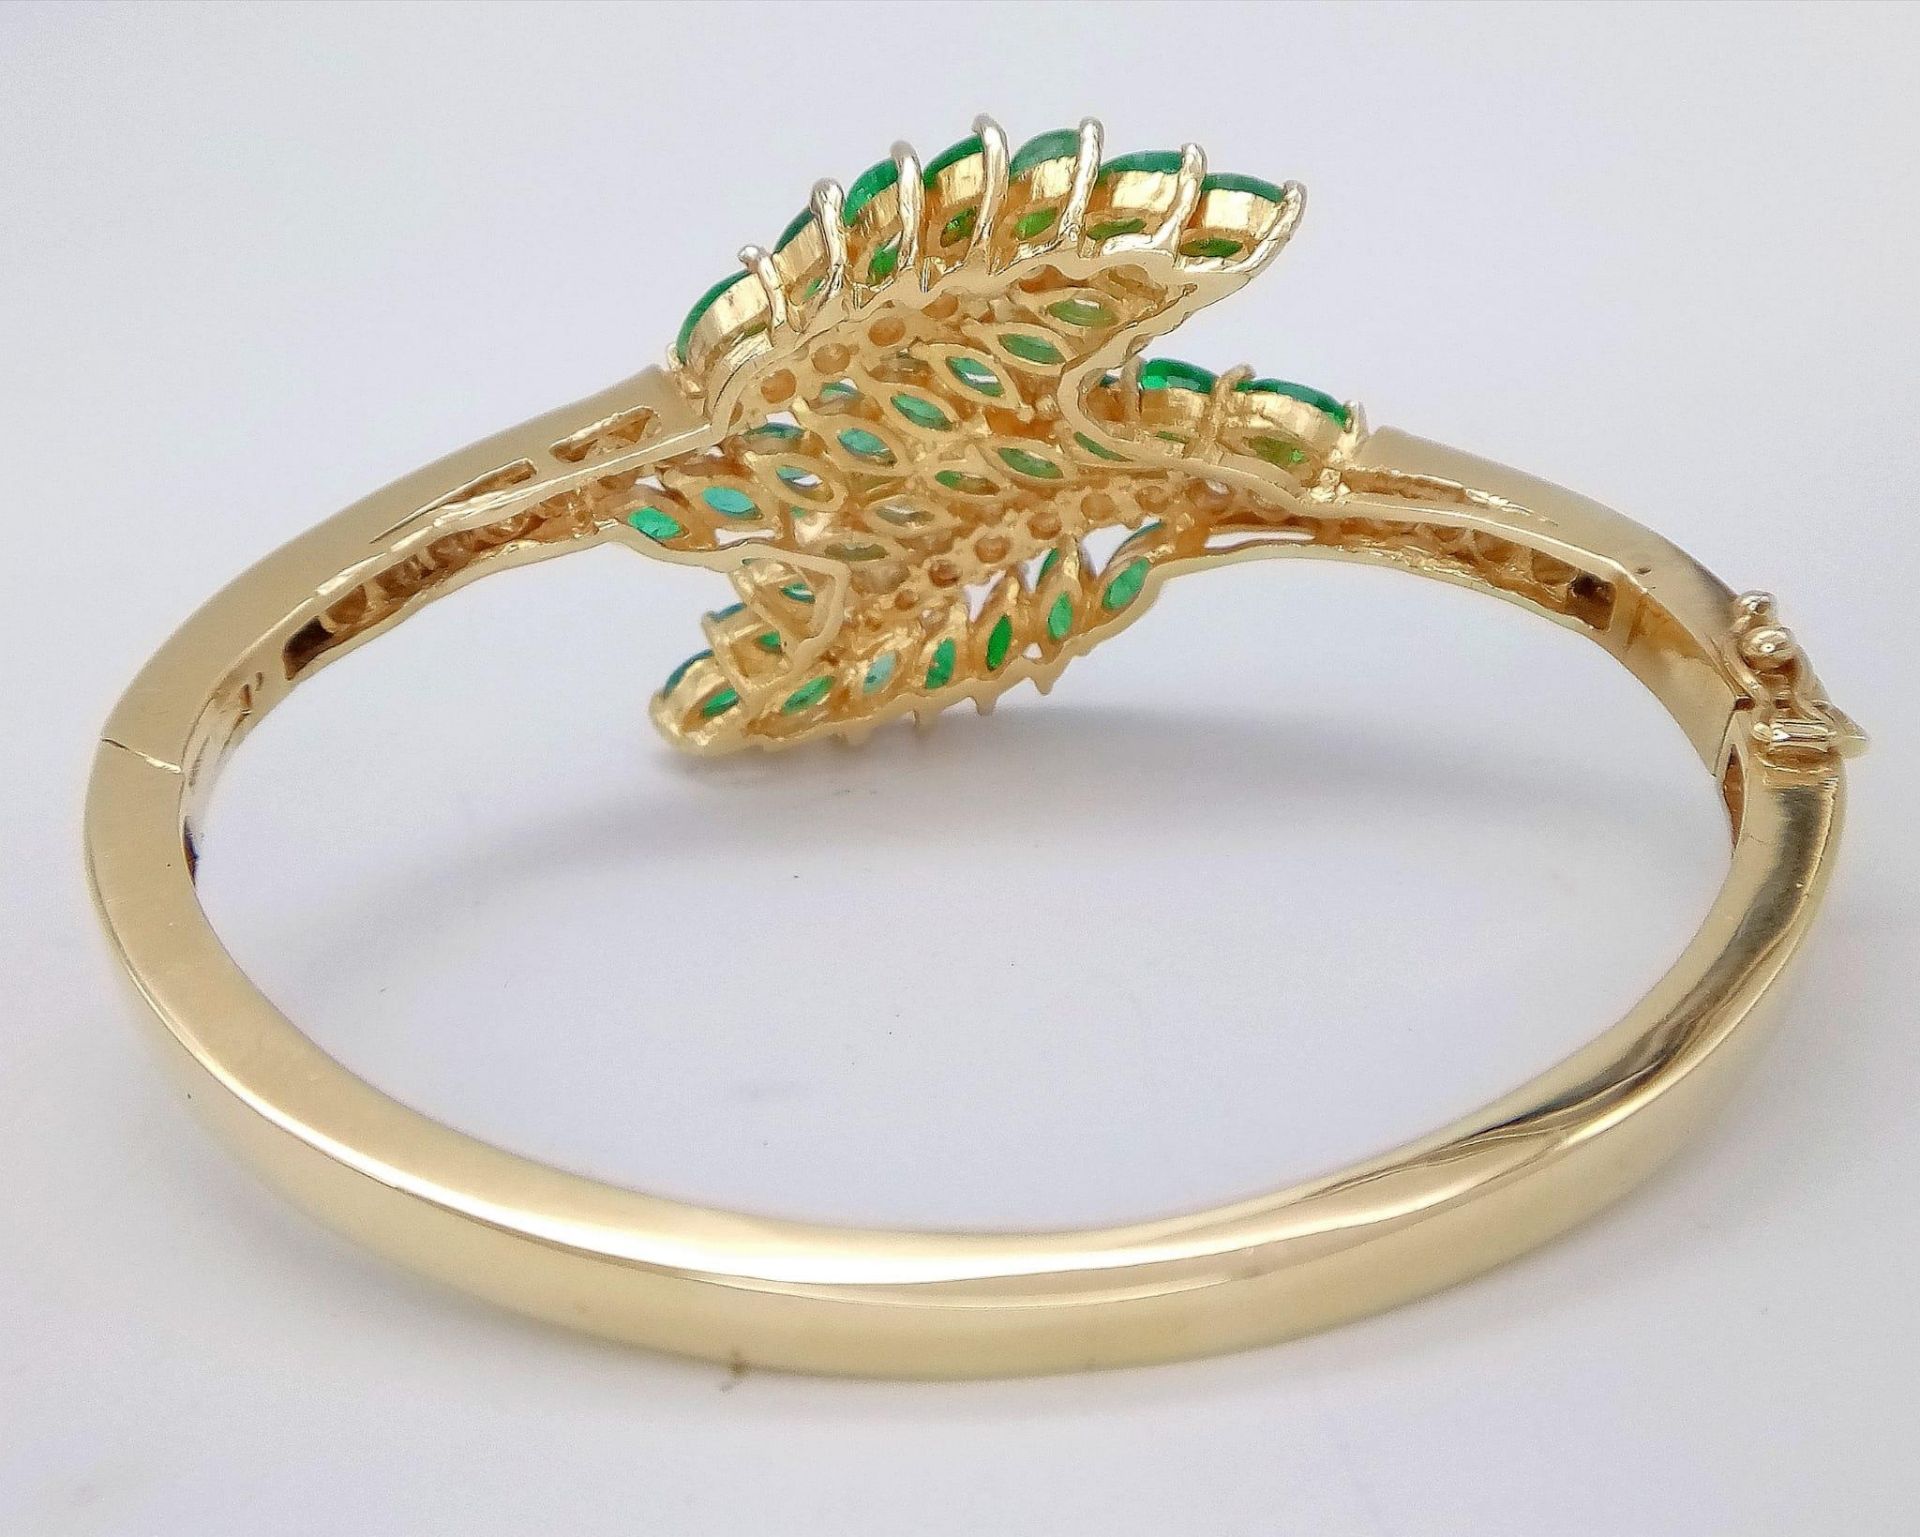 A DIAMOND AND EMERALD LEAF DESIGN BANGLE IN CROSSOVER STYLE SET IN18K GOLD . 33.5gms 10457 - Image 14 of 15